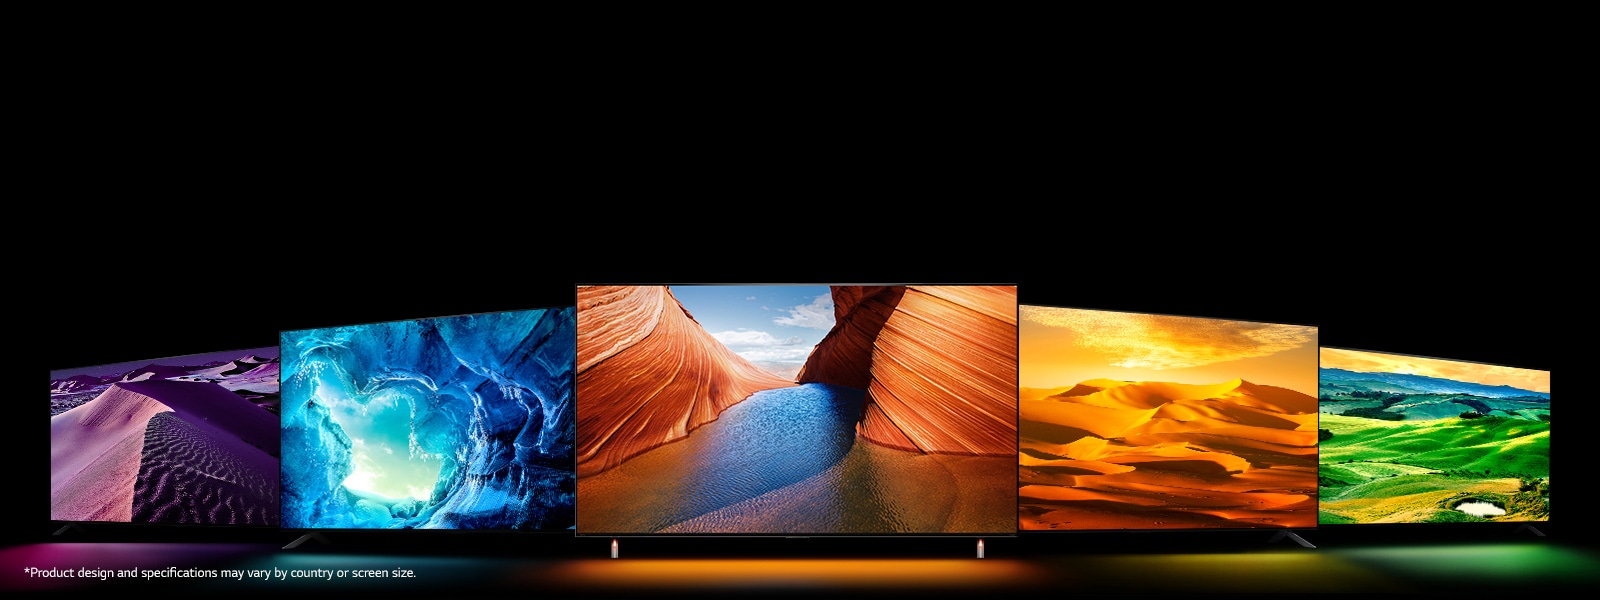 There are five QNED TVs – one in the middle facing forward. Two are placed on the left side and two are placed on the right side. There is purple desert image at night on very left TV, blue icy cave on second left TV, orange-colored cliffs on blowhole facing each other on middle TV, bright yellow desert on right TV, and vast open green field on very right TV. 